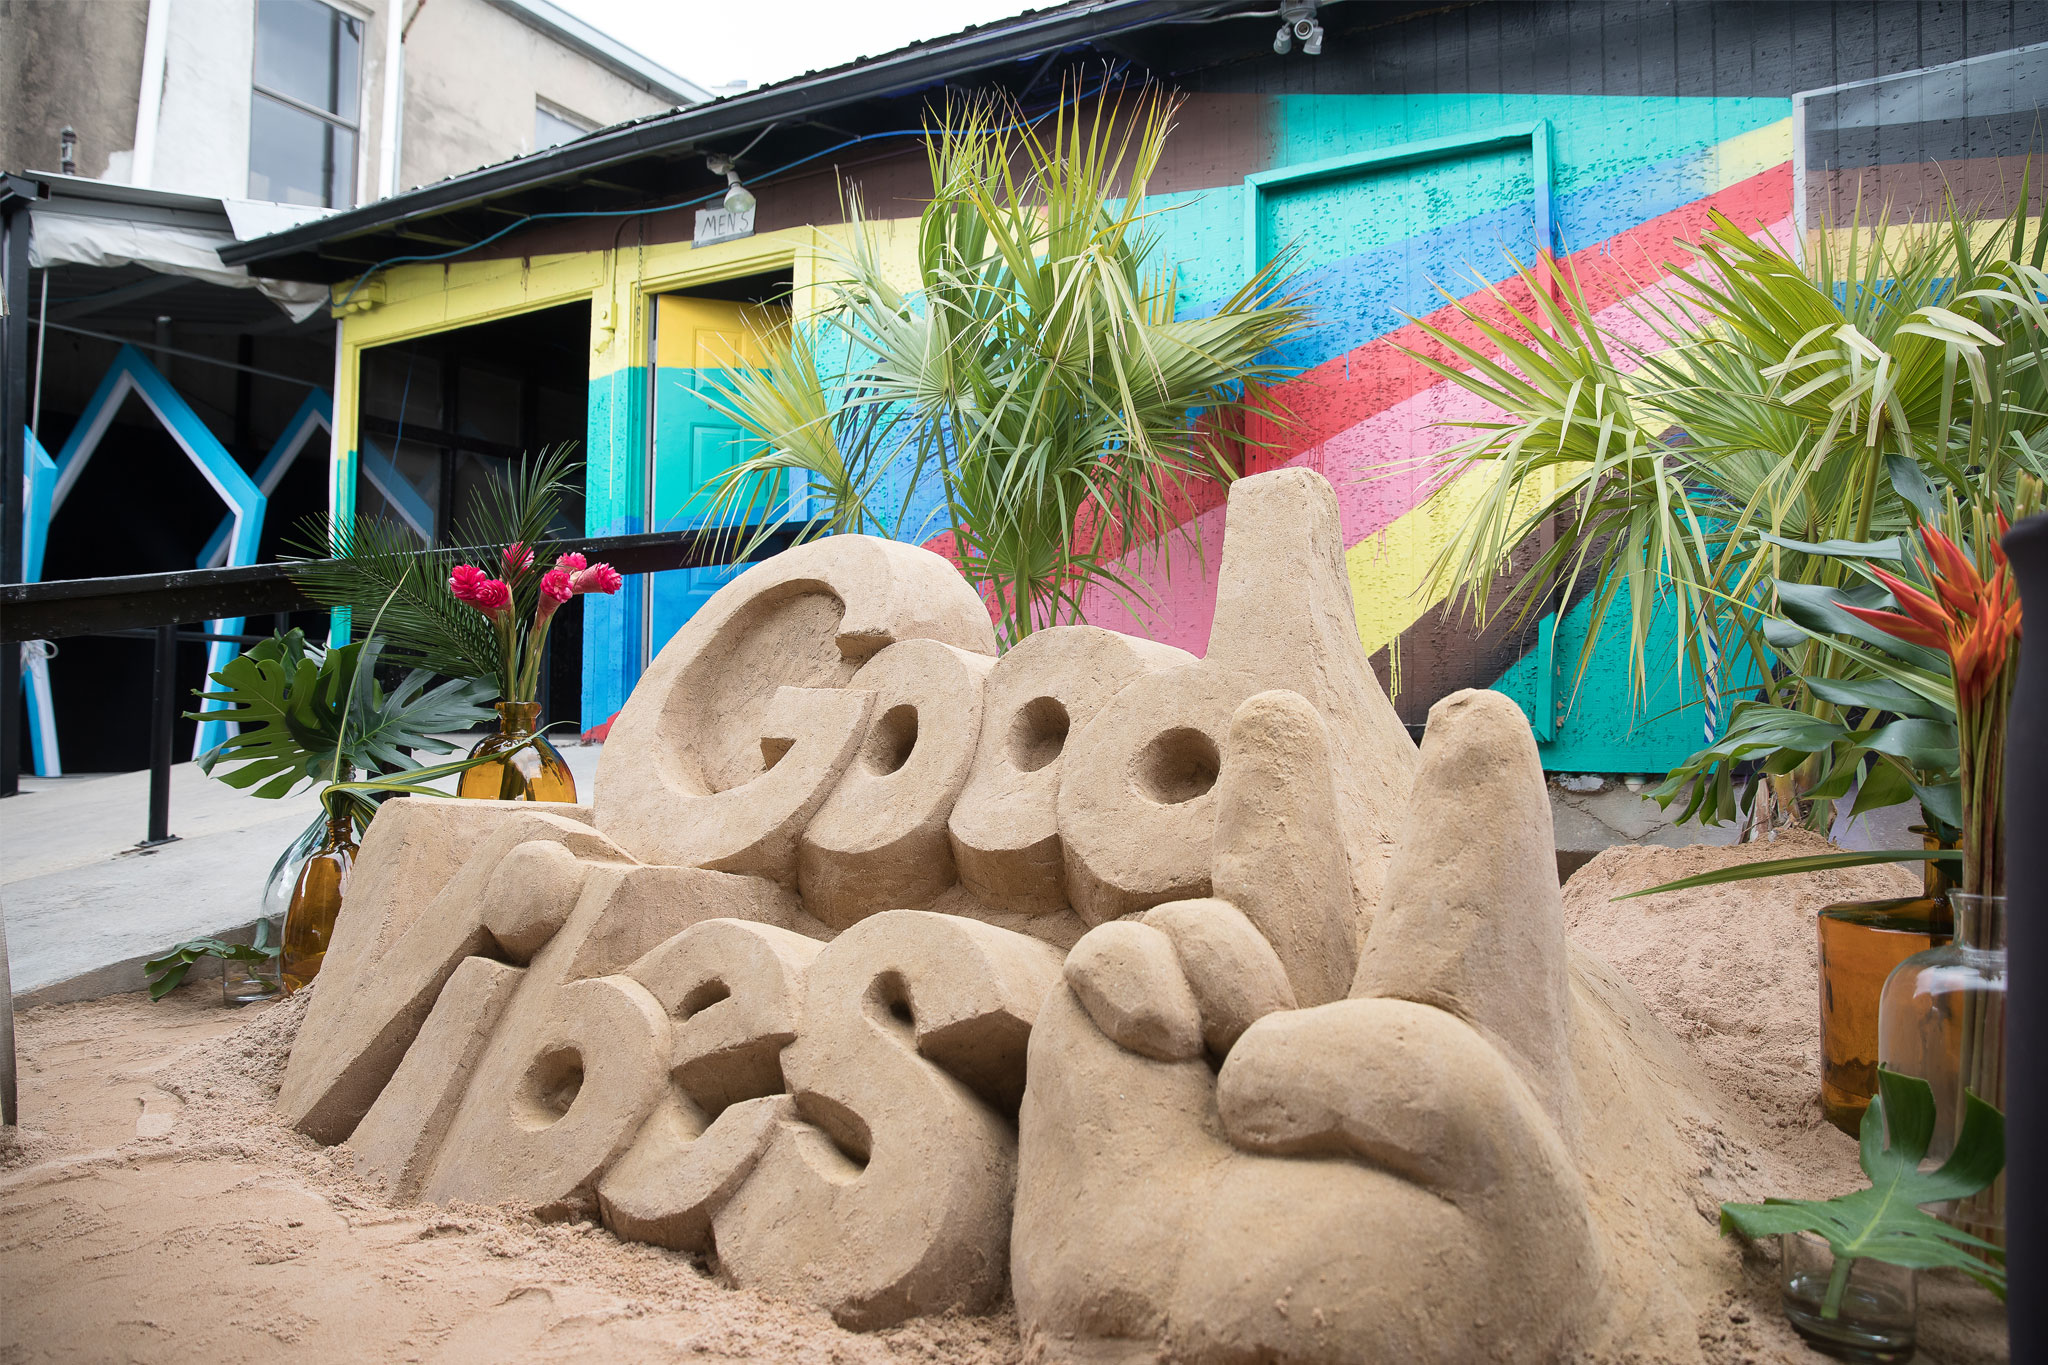 Picture of sand sculpture art at SXSW event.